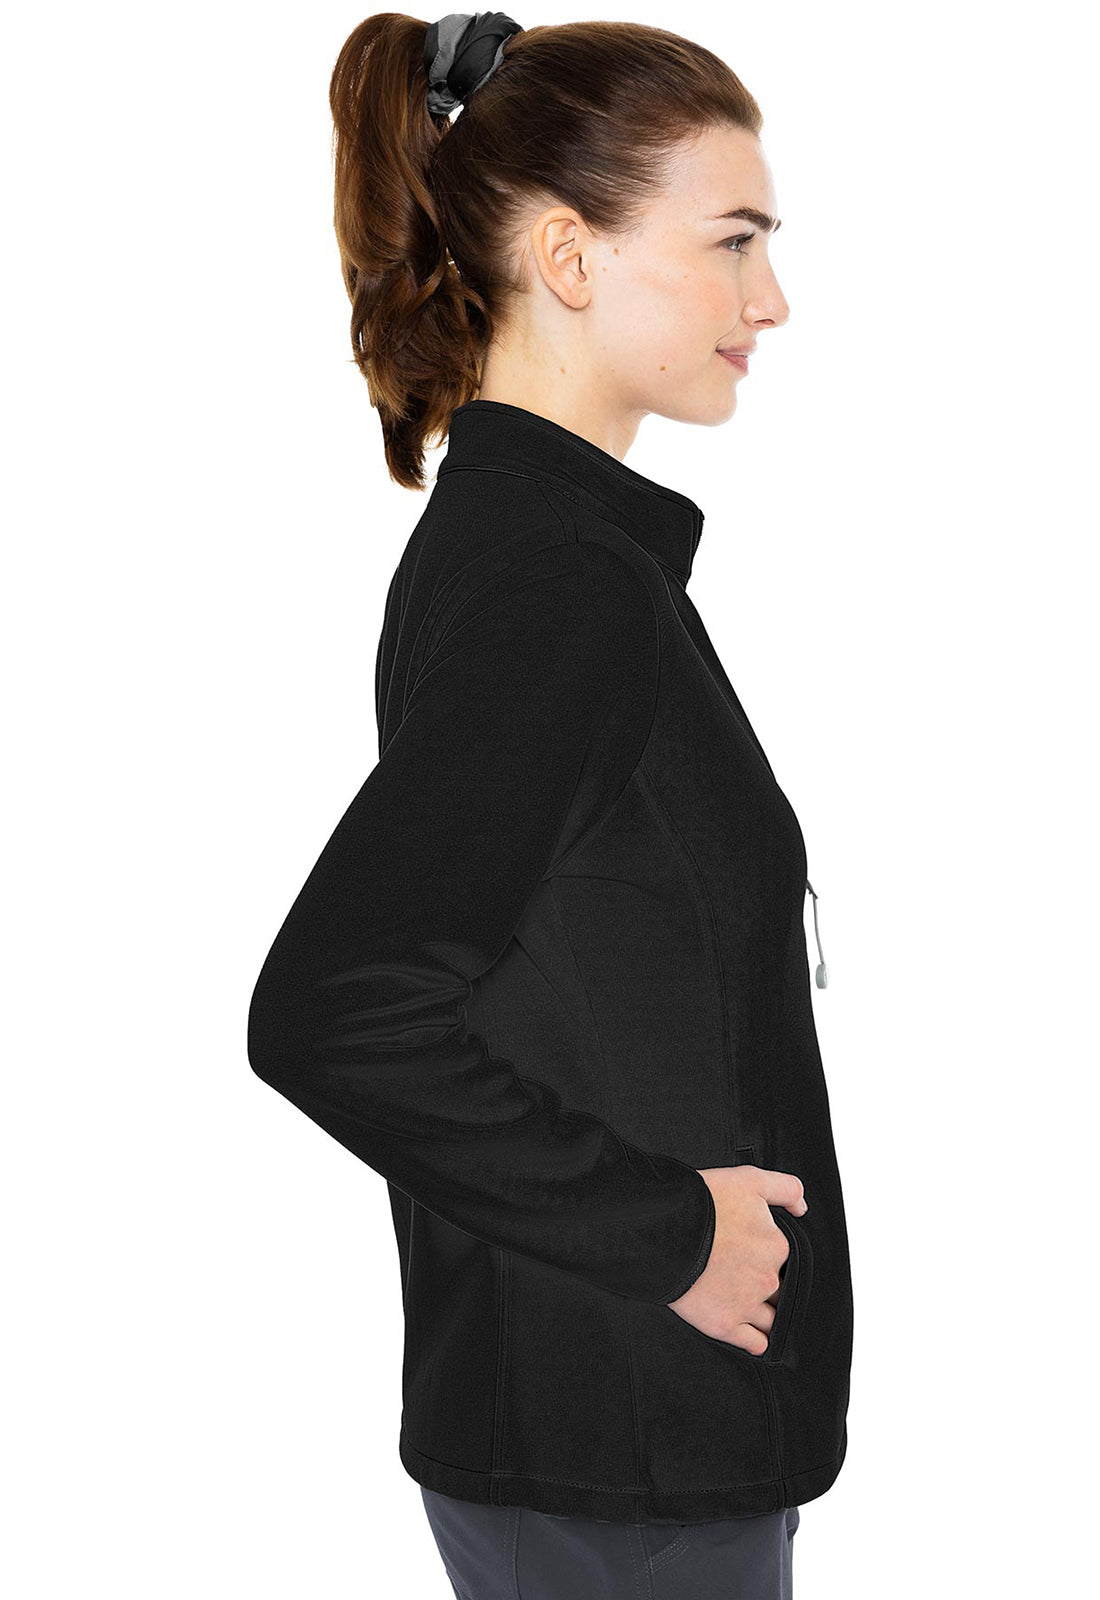 Med Couture - Performance Fleece Scrub Jacket Women's Scrub Jacket Med Couture   